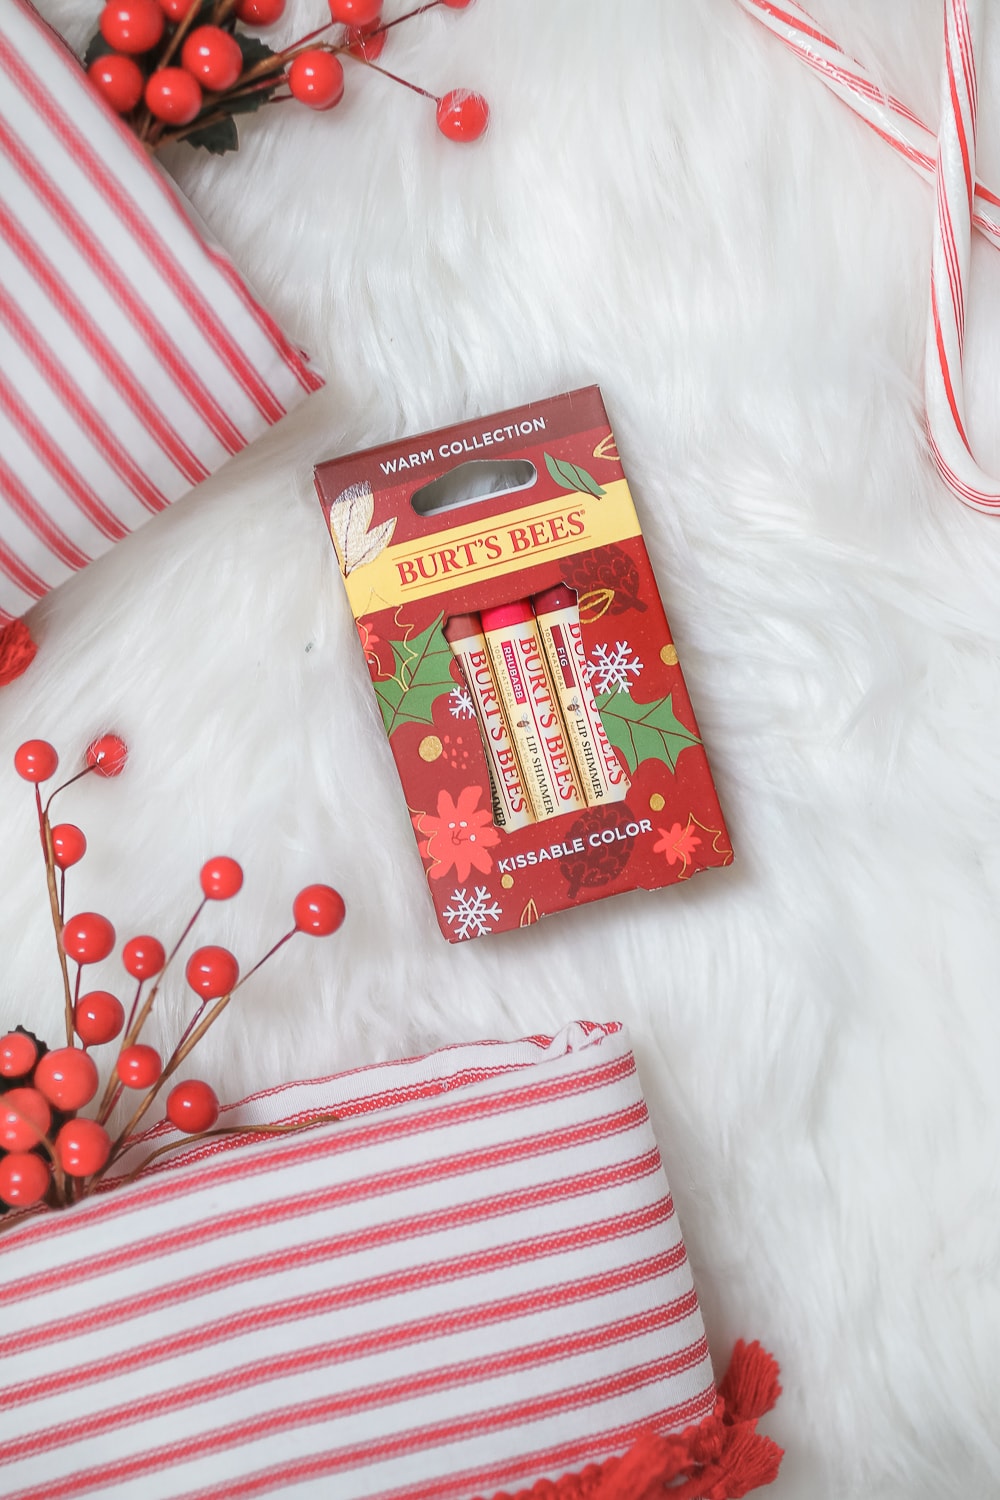 Blogger Stephanie Ziajka shares why the Burt's Bees Mistletoe Kiss Gift Set is a perfect stocking stuffer for teens on Diary of a Debutante